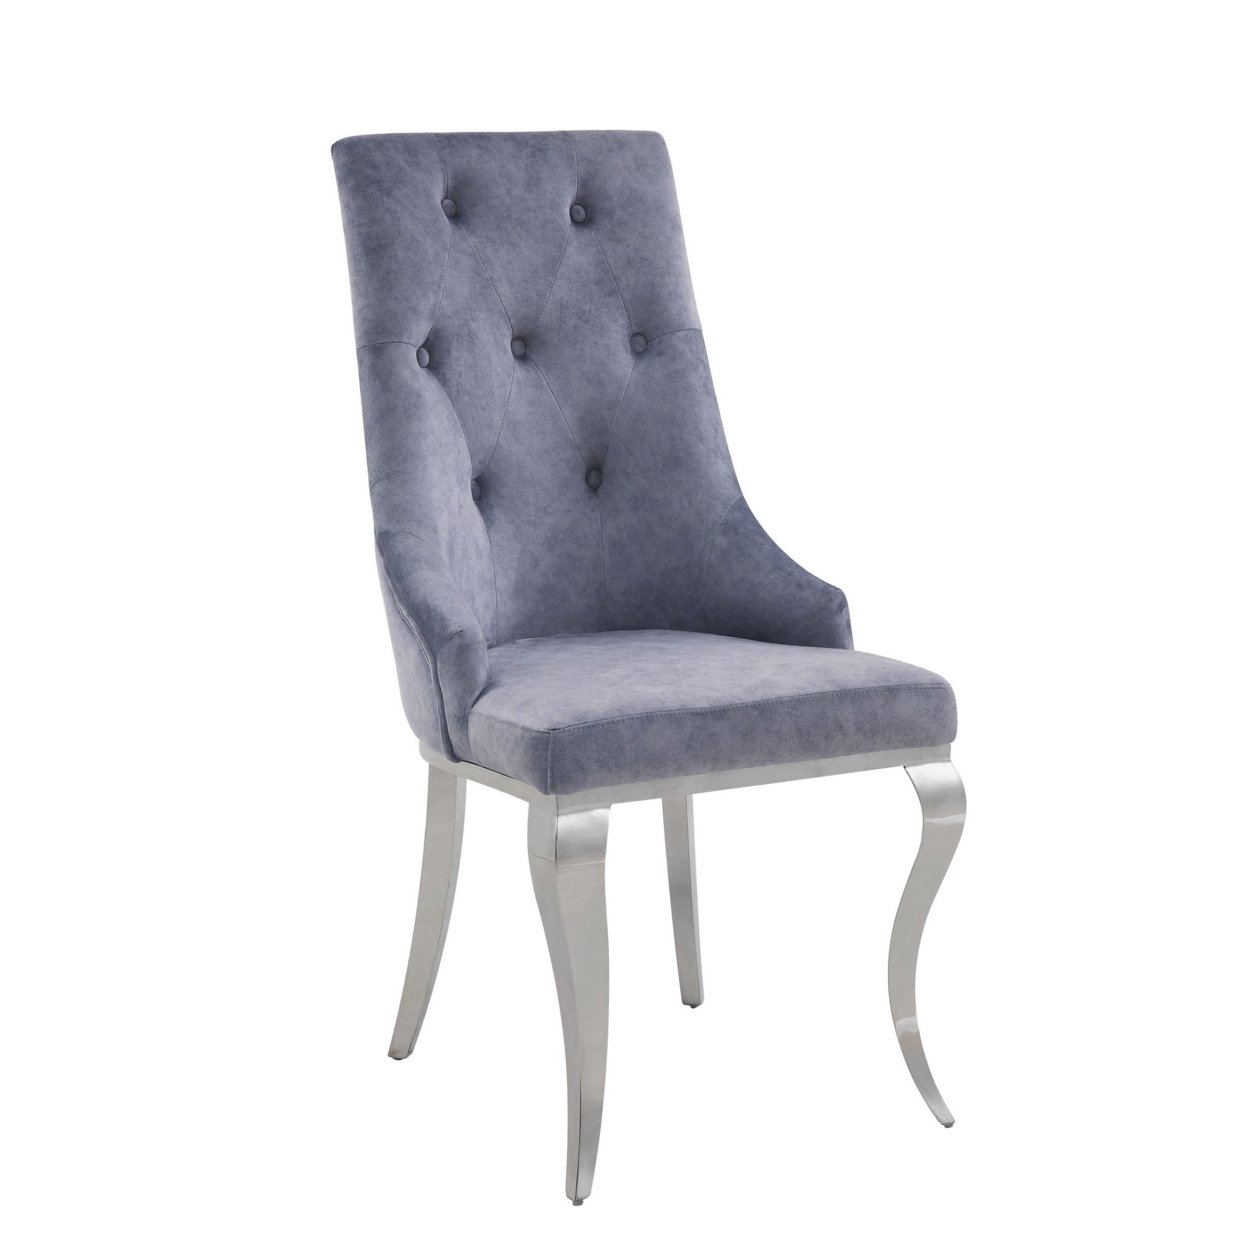 Side Chair With Button Tufting And Metal Legs, Set Of 2, Gray And Silver- Saltoro Sherpi